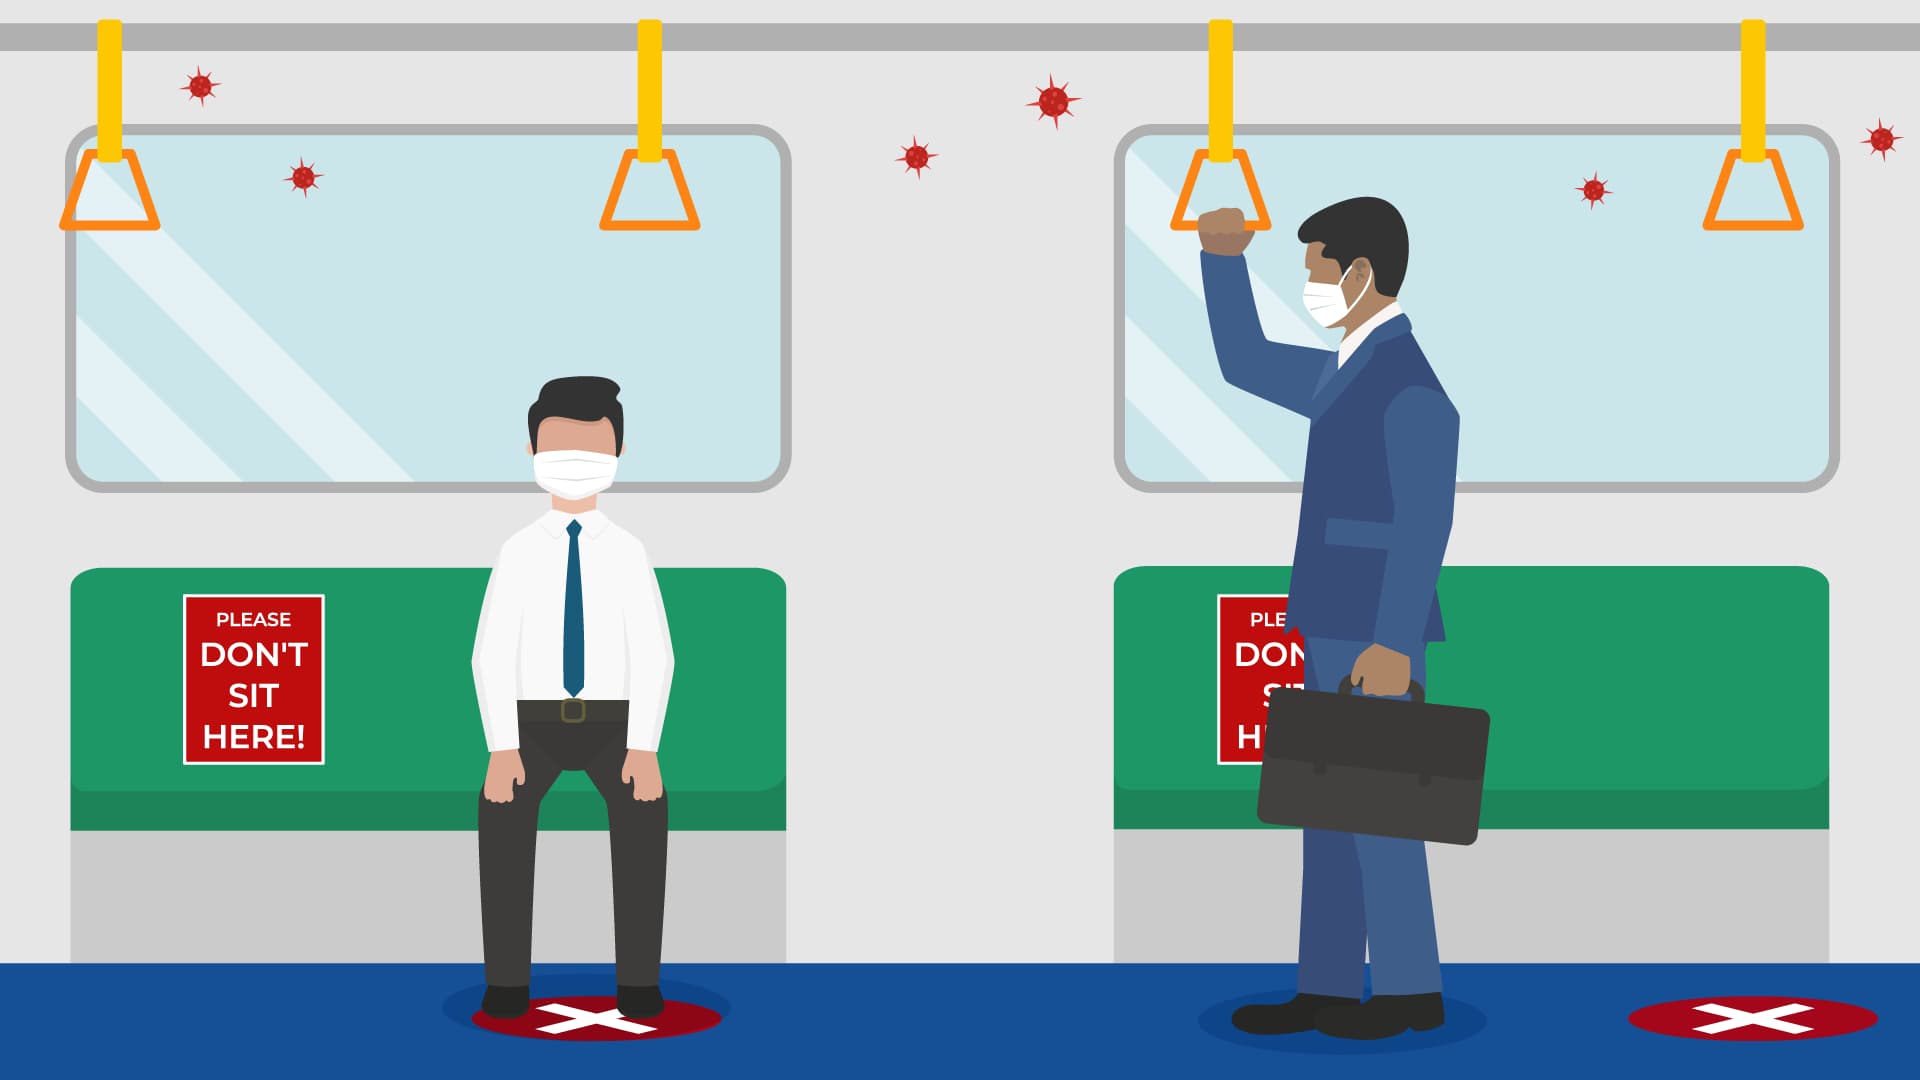 Illustration of two people wearing masks on train to work